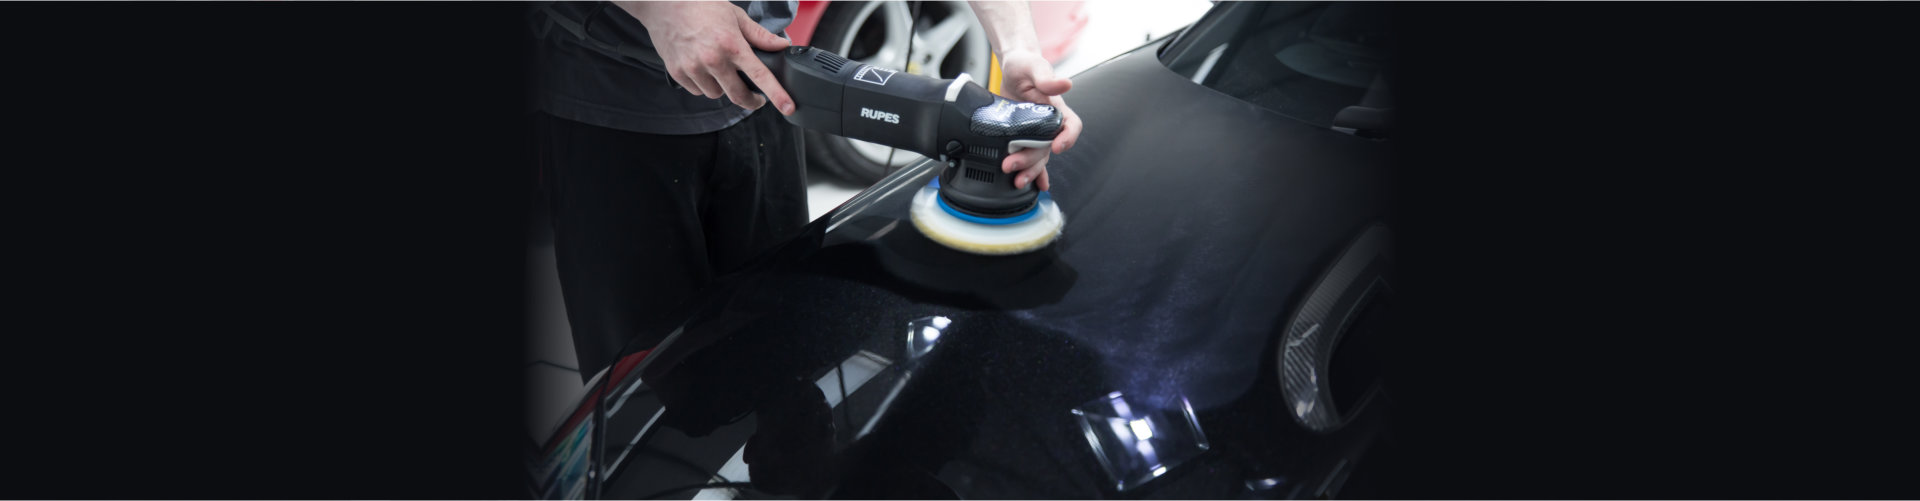 Detailer using a Rupes rotary machine on a luxury car. Automobile, swirl.